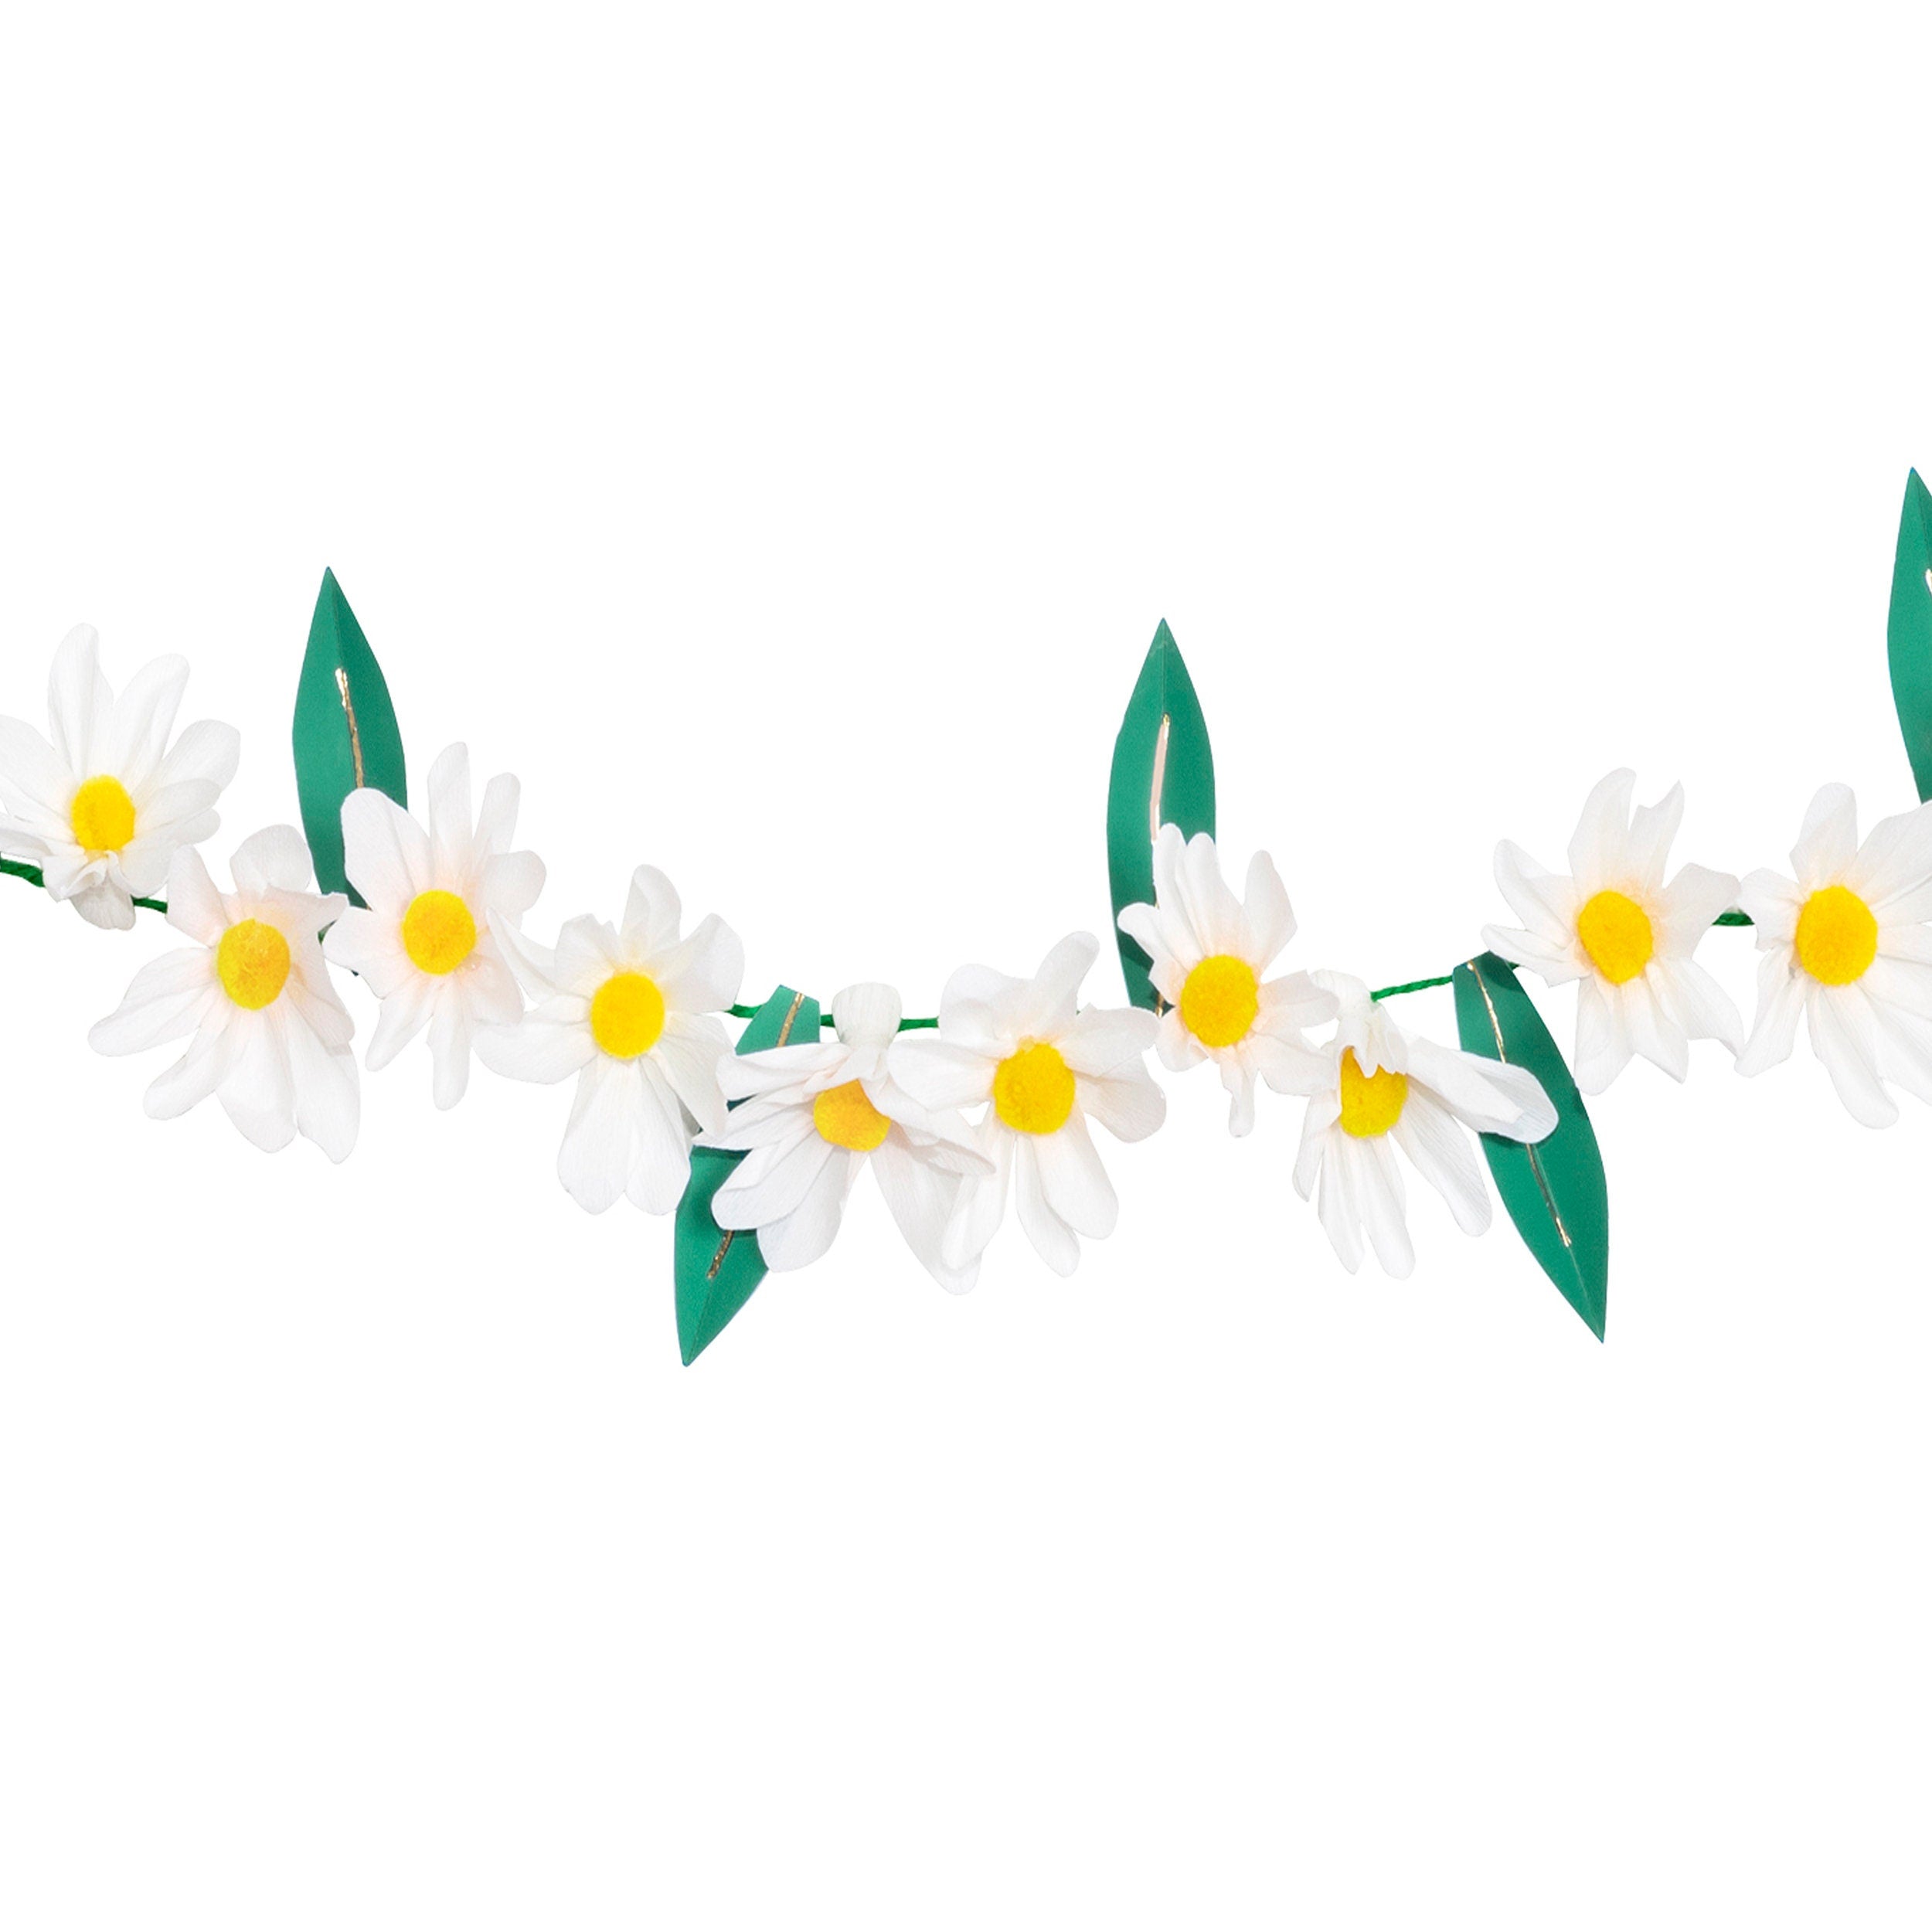 Daisy Garland | Floral Garland - Daisy Decorations - Easter Decorations - Mother's Day Decorations - Flower Garland - Crepe Paper Flowers